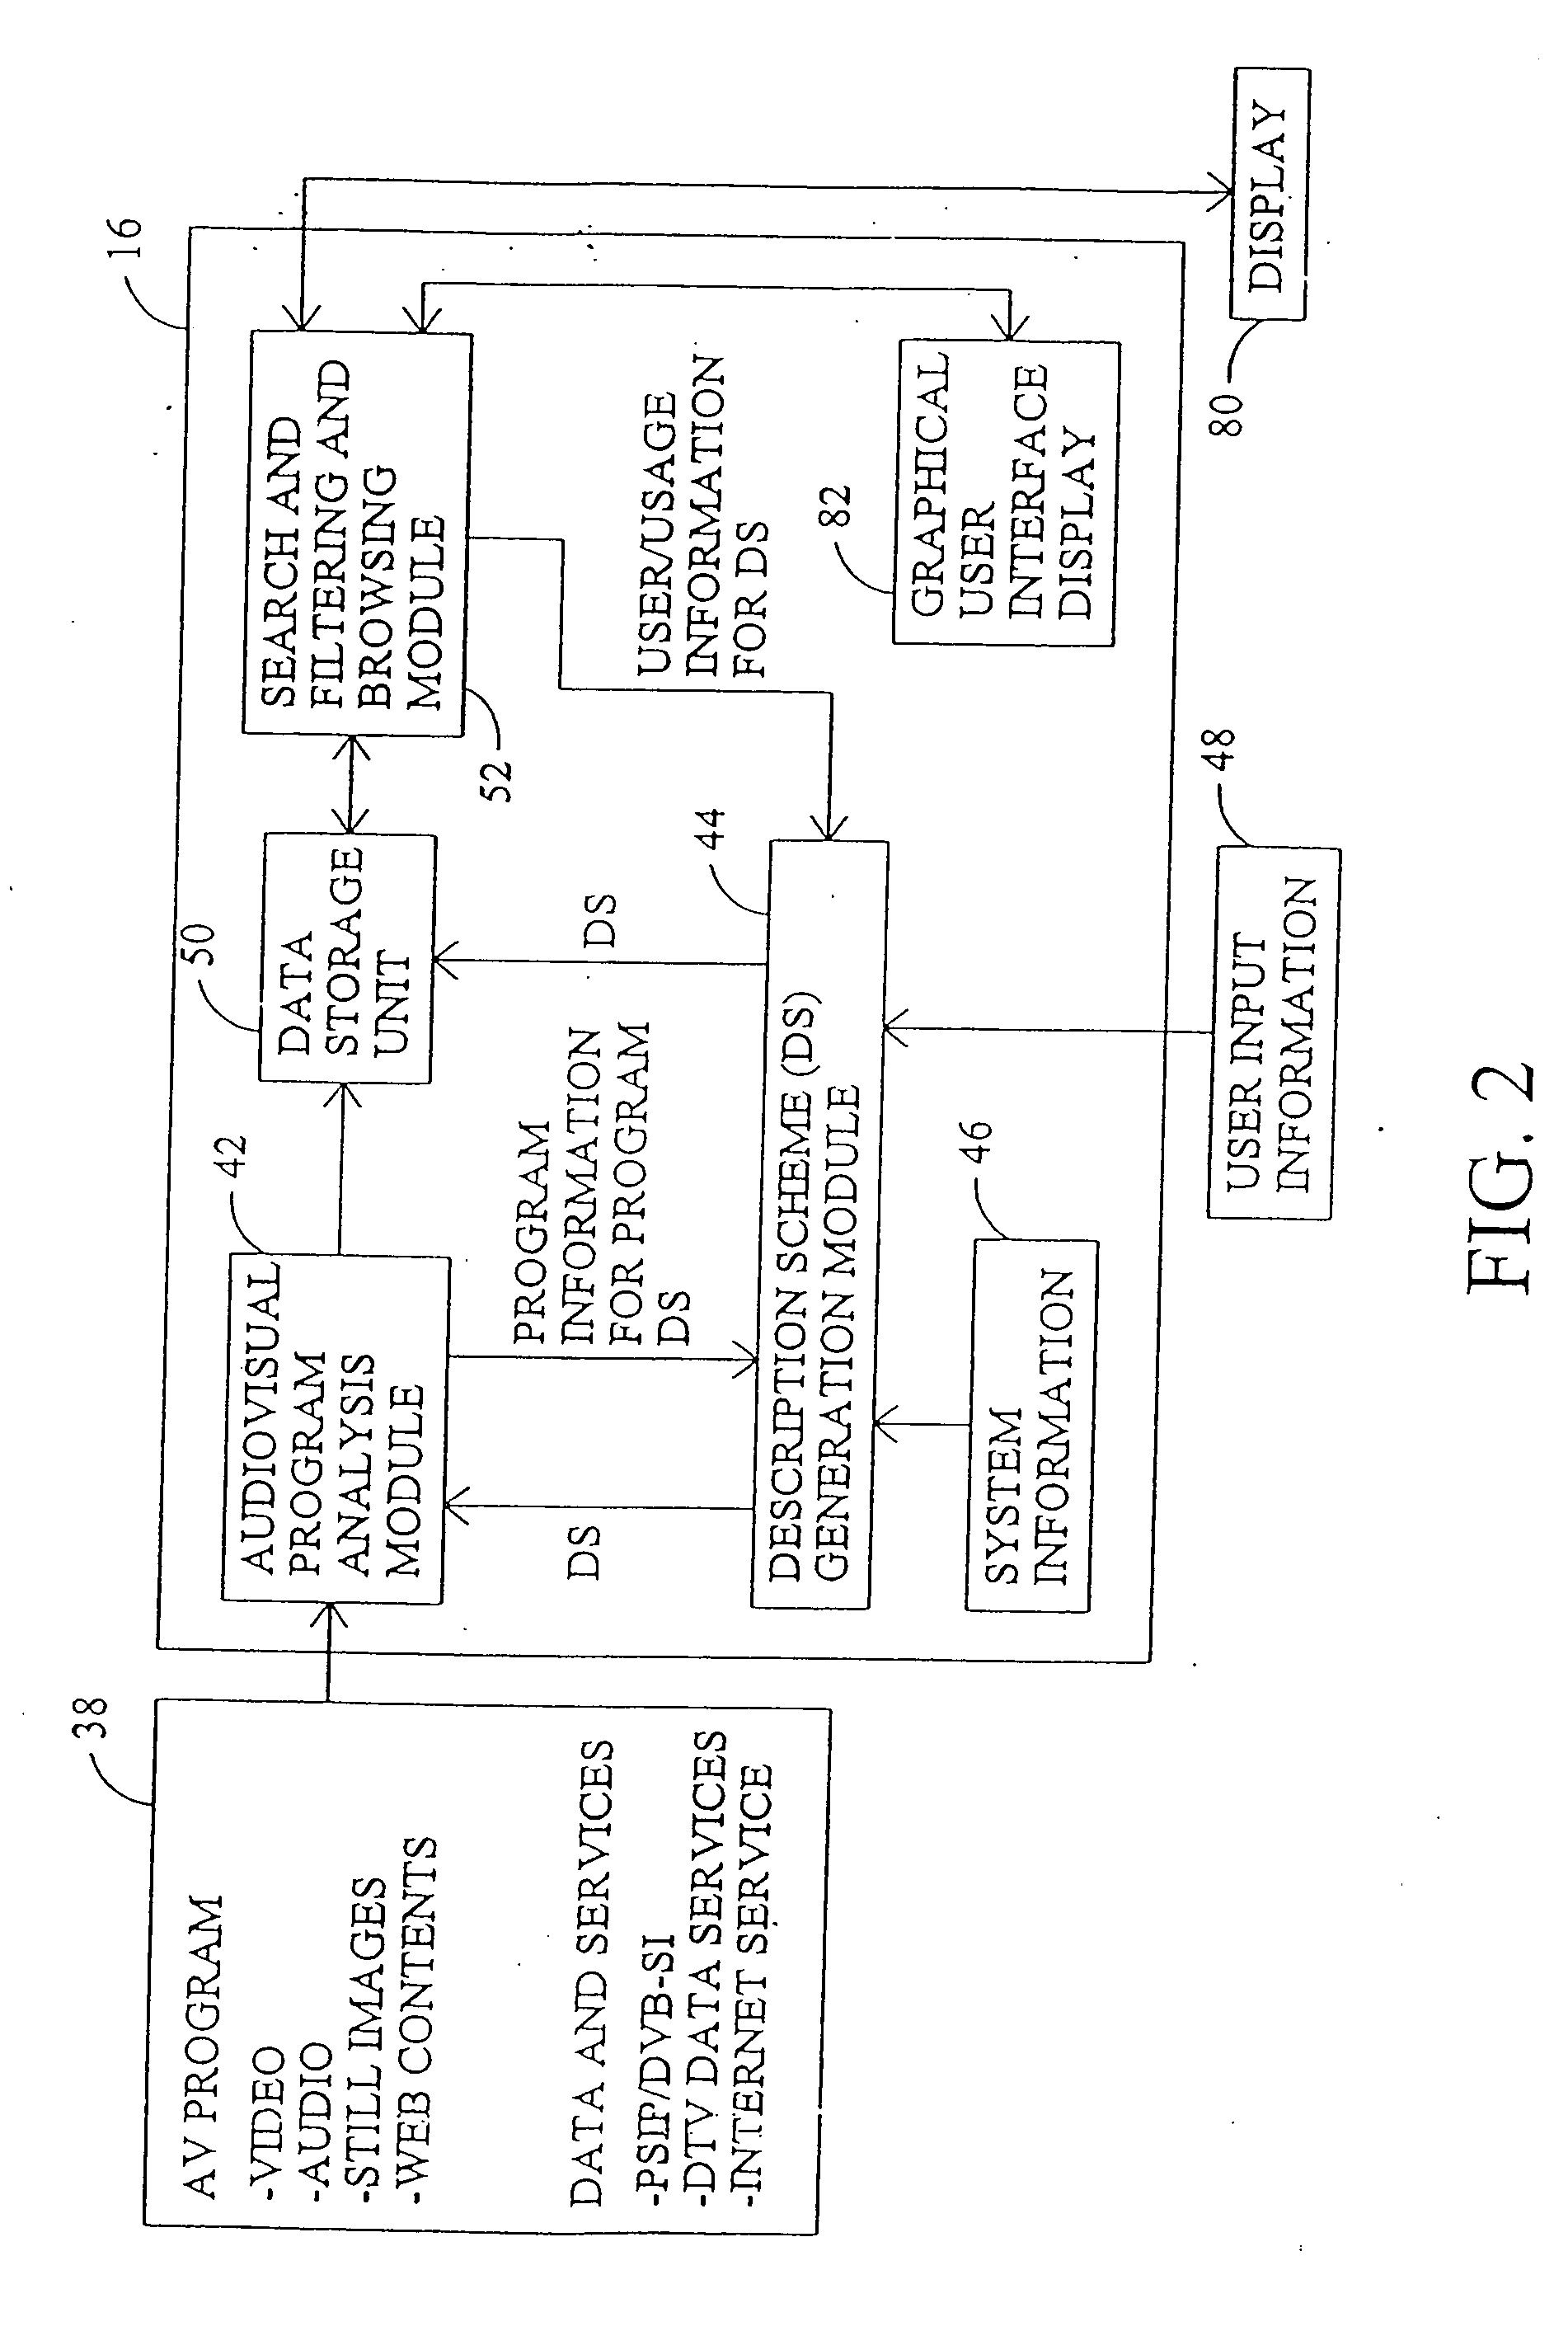 Audiovisual information management system with seasons